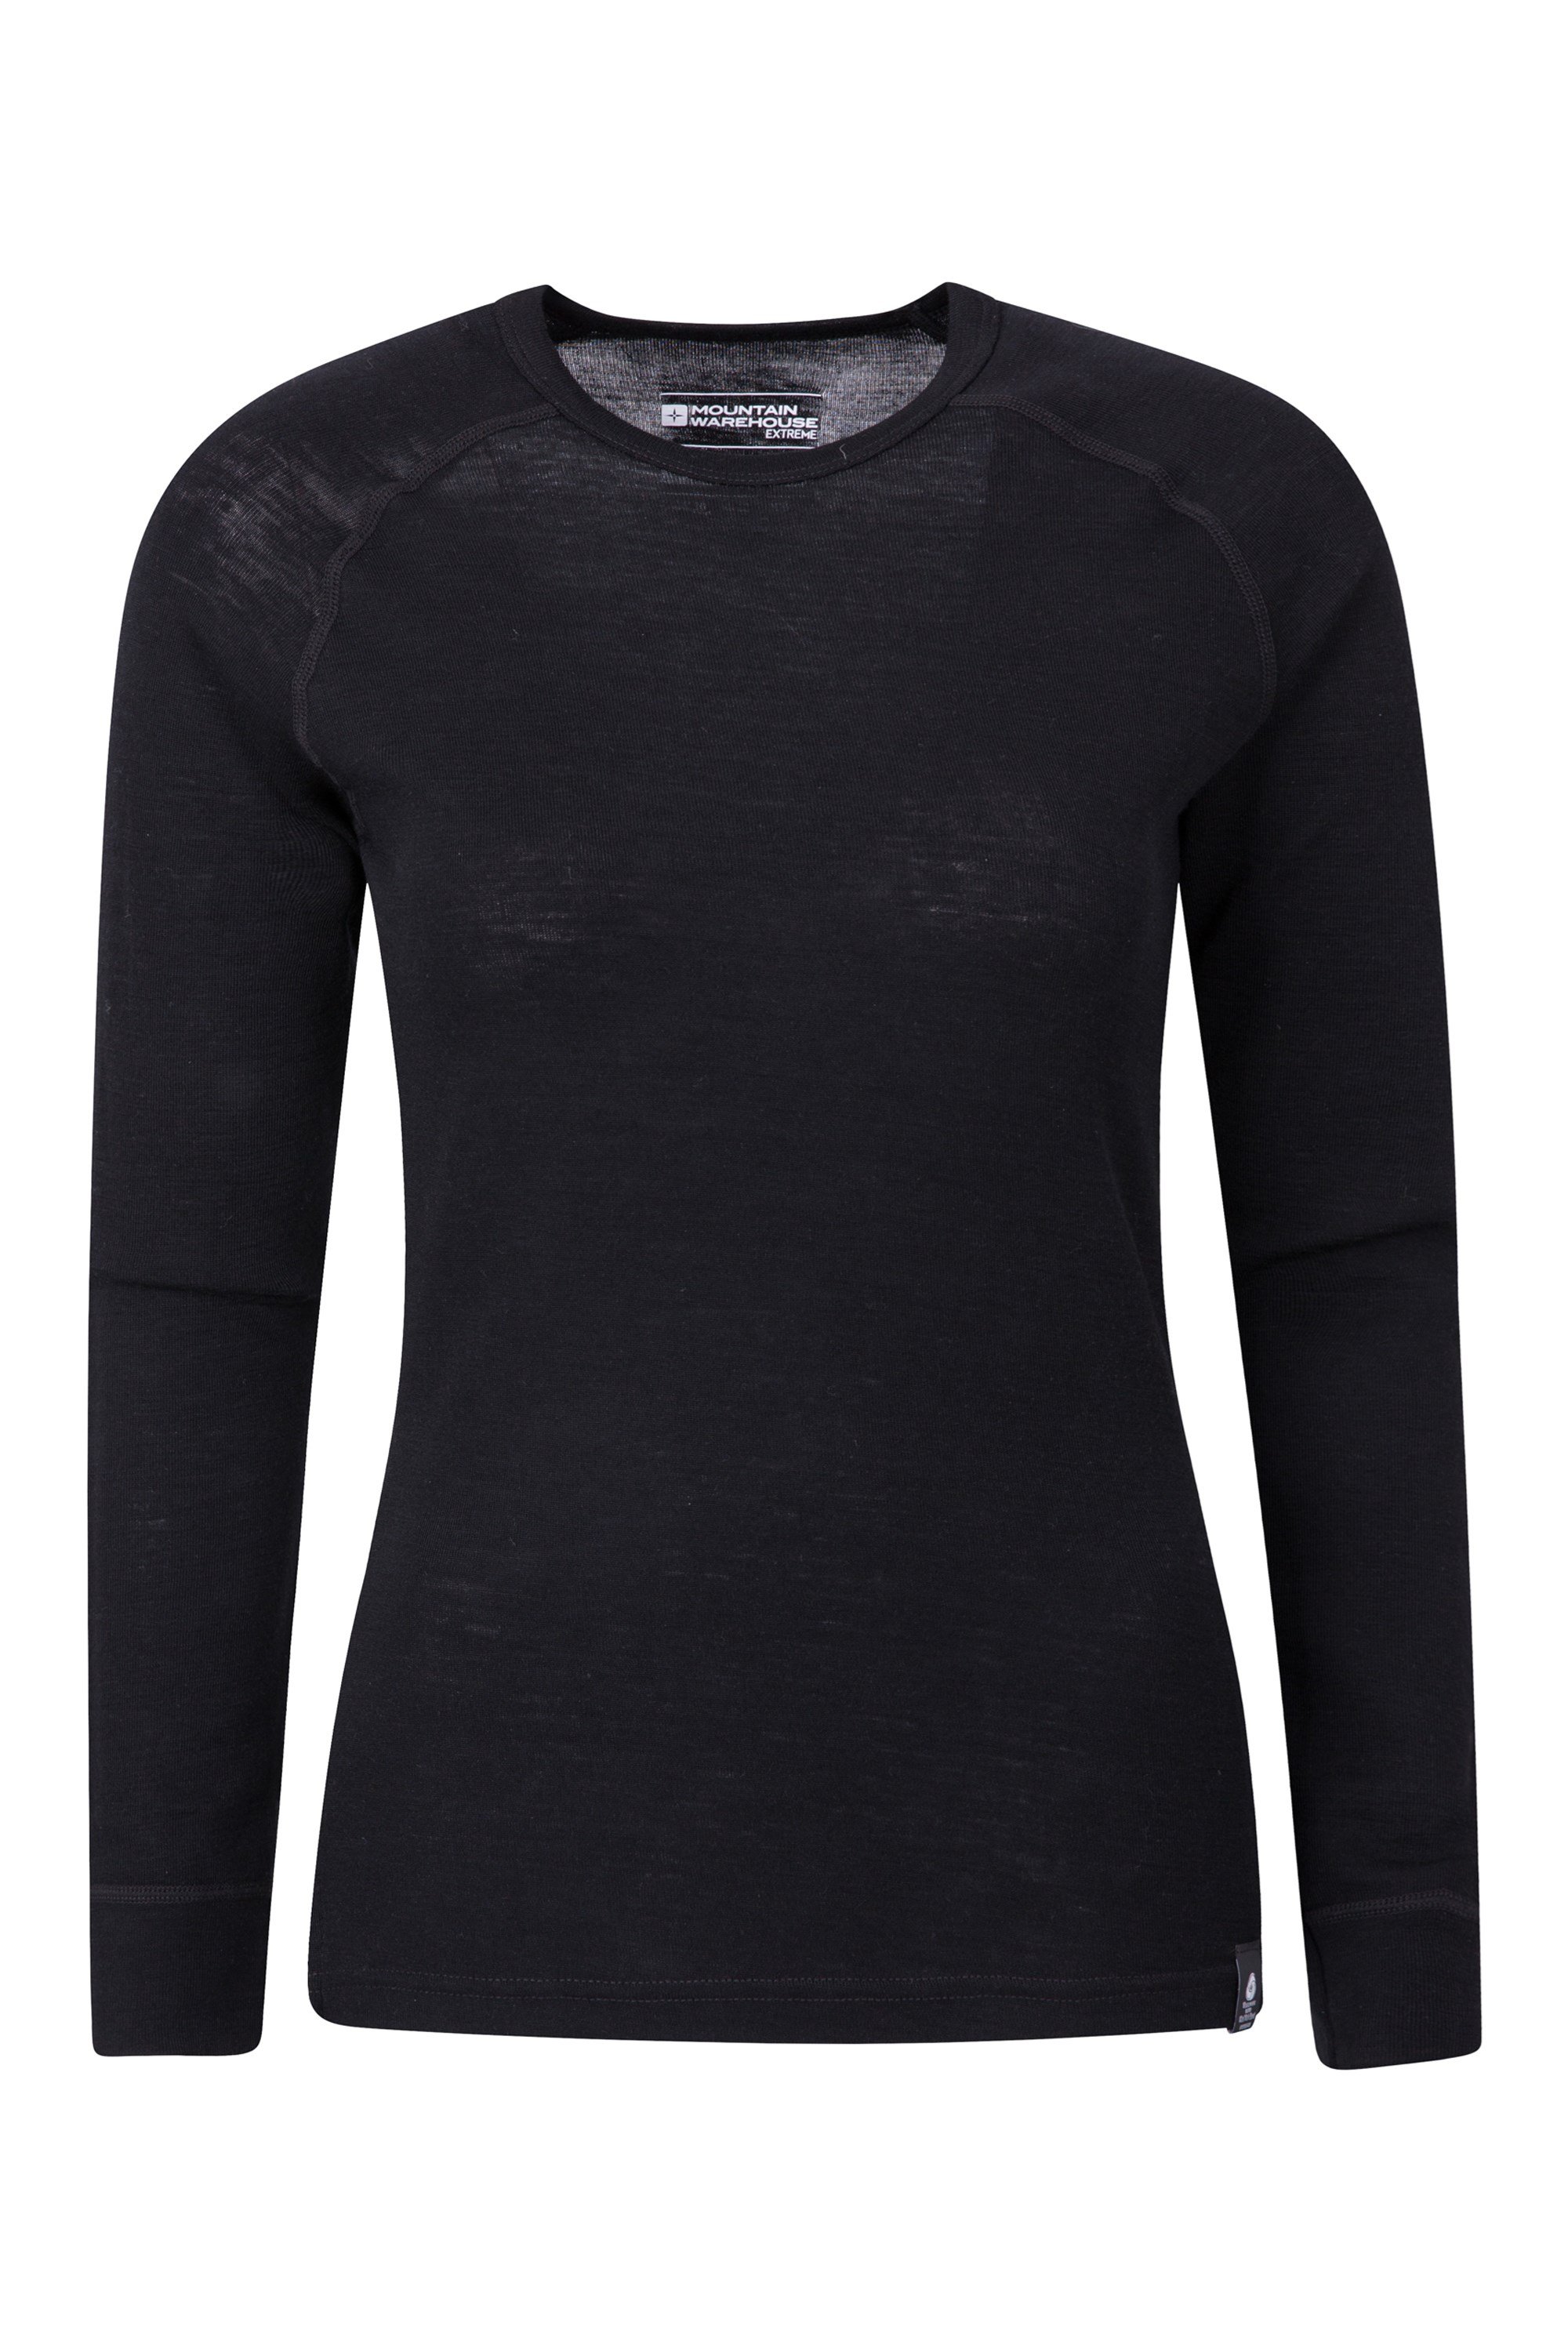 Mountain Warehouse Merino Womens Thermal Baselayer Top Hiking for Winter Travel Snowboard Black 22 Antibacterial & Breathable Ladies T Shirt Camping Skiing Lightweight 